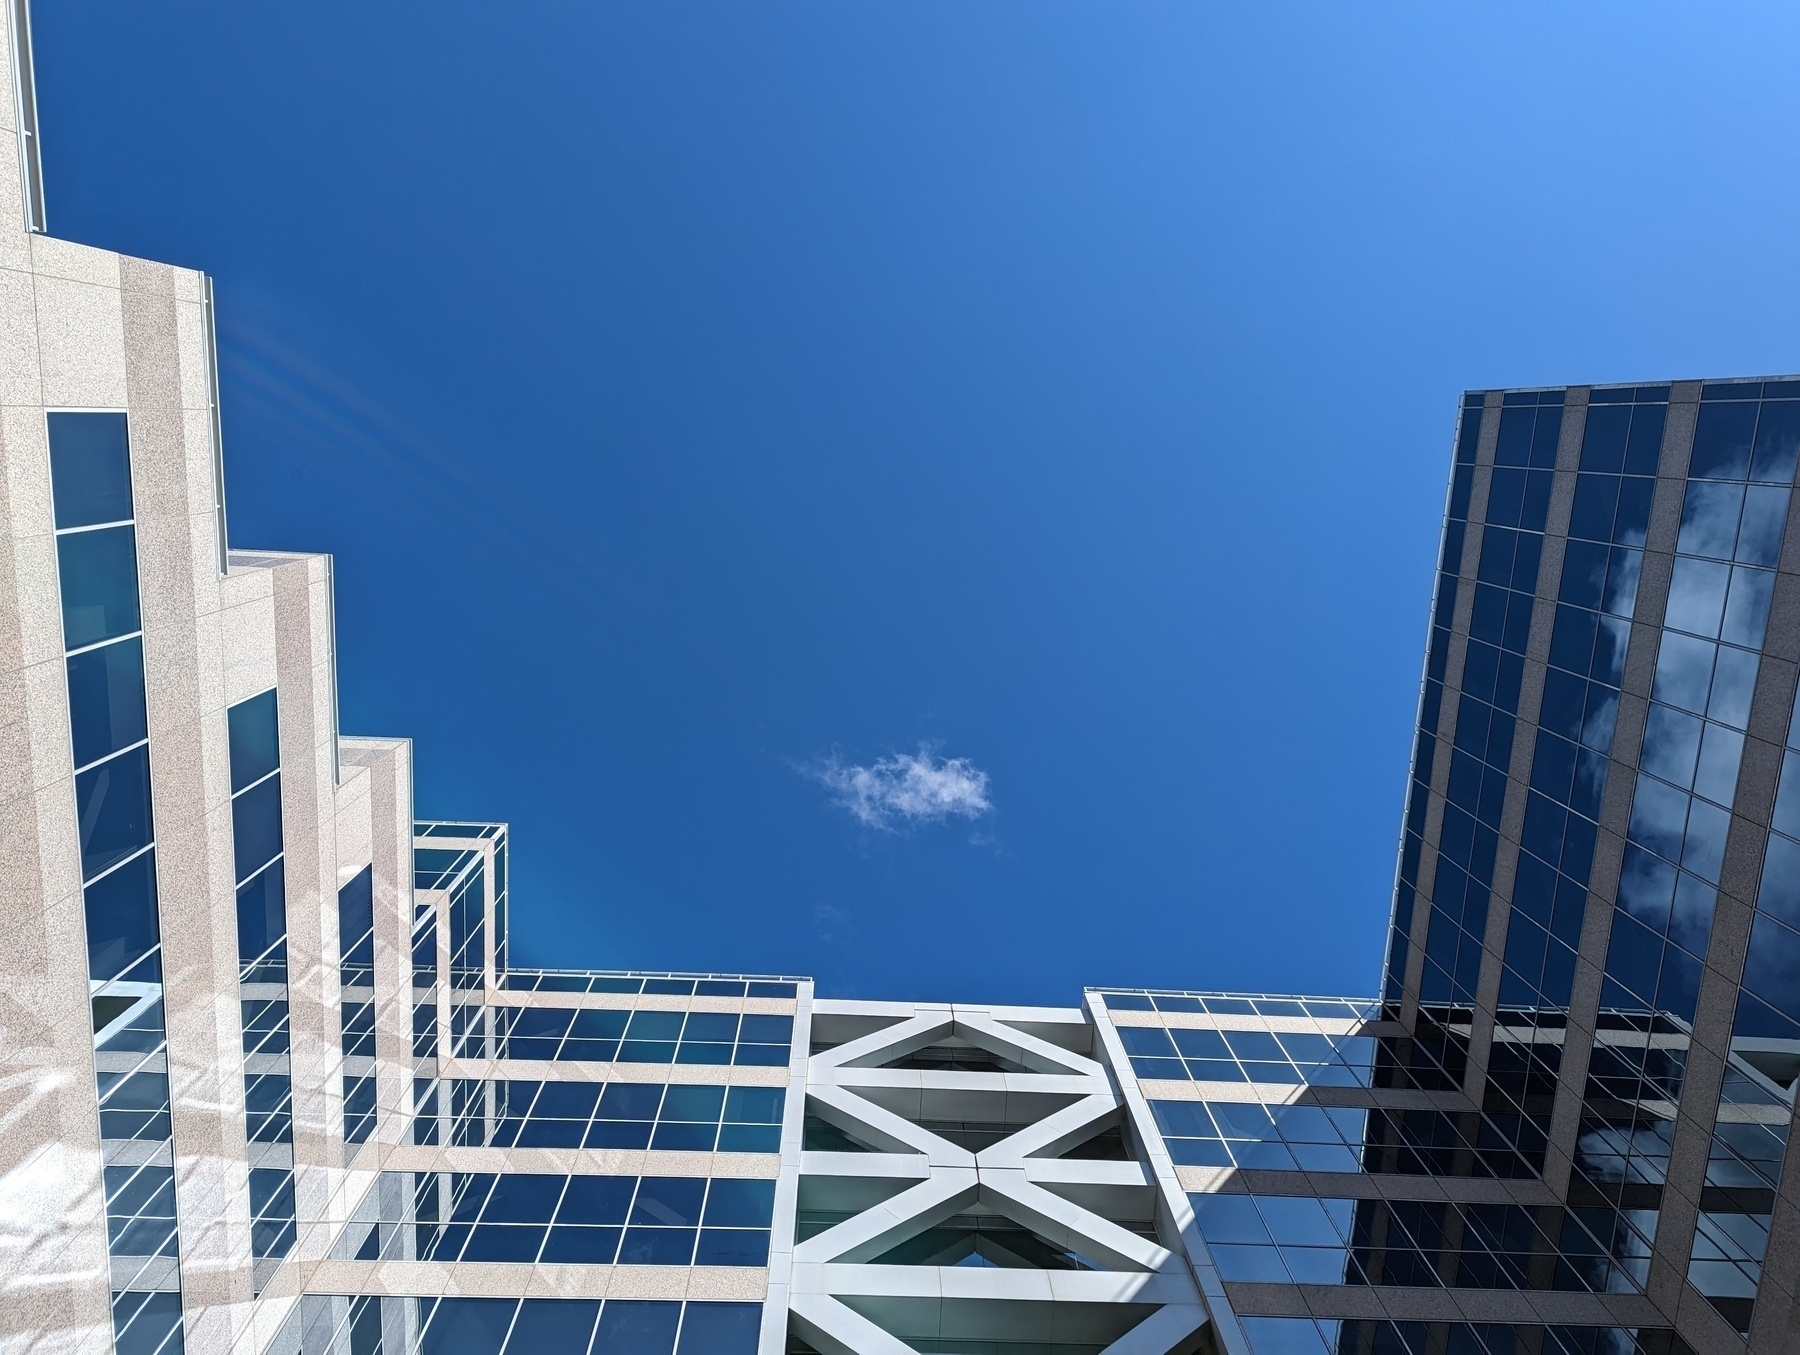 A small white cloud in deep blue sky directly overhead and framed loosely on three sides by shiny glass windows within building walls at the California Plaza office complex Wednesday, March 8, 2023 in the 2100 block of North California Boulevard in Walnut Creek, California.